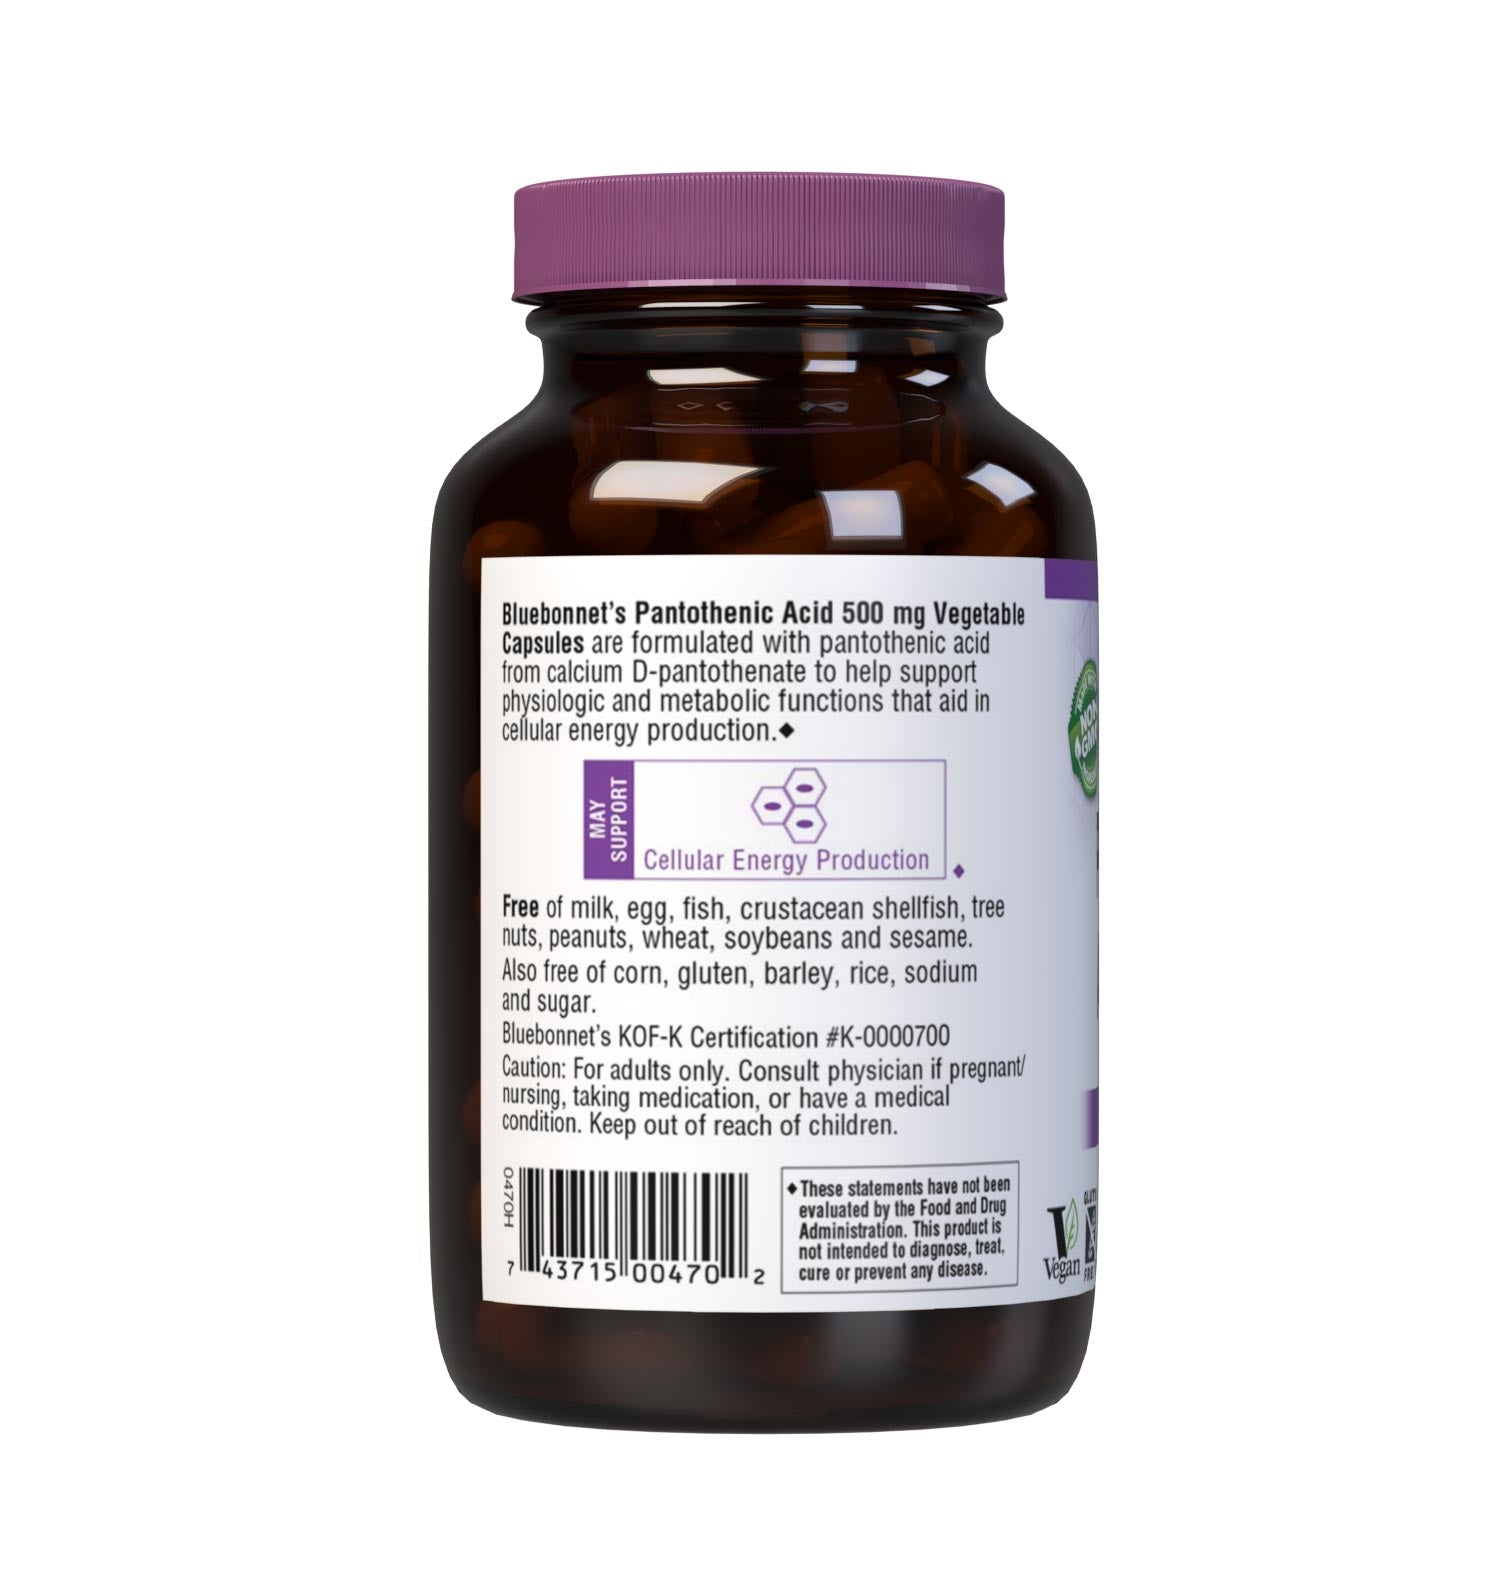 Bluebonnet’s Pantothenic Acid 500 mg 90 Vegetable Capsules are formulated with pantothenic acid from calcium D-pantothenate. Tested for potency and purity in our own state-of-the-art laboratory. Pantothenic acid may support cellular energy production. Supplement facts panel. Description panel. #size_90 count